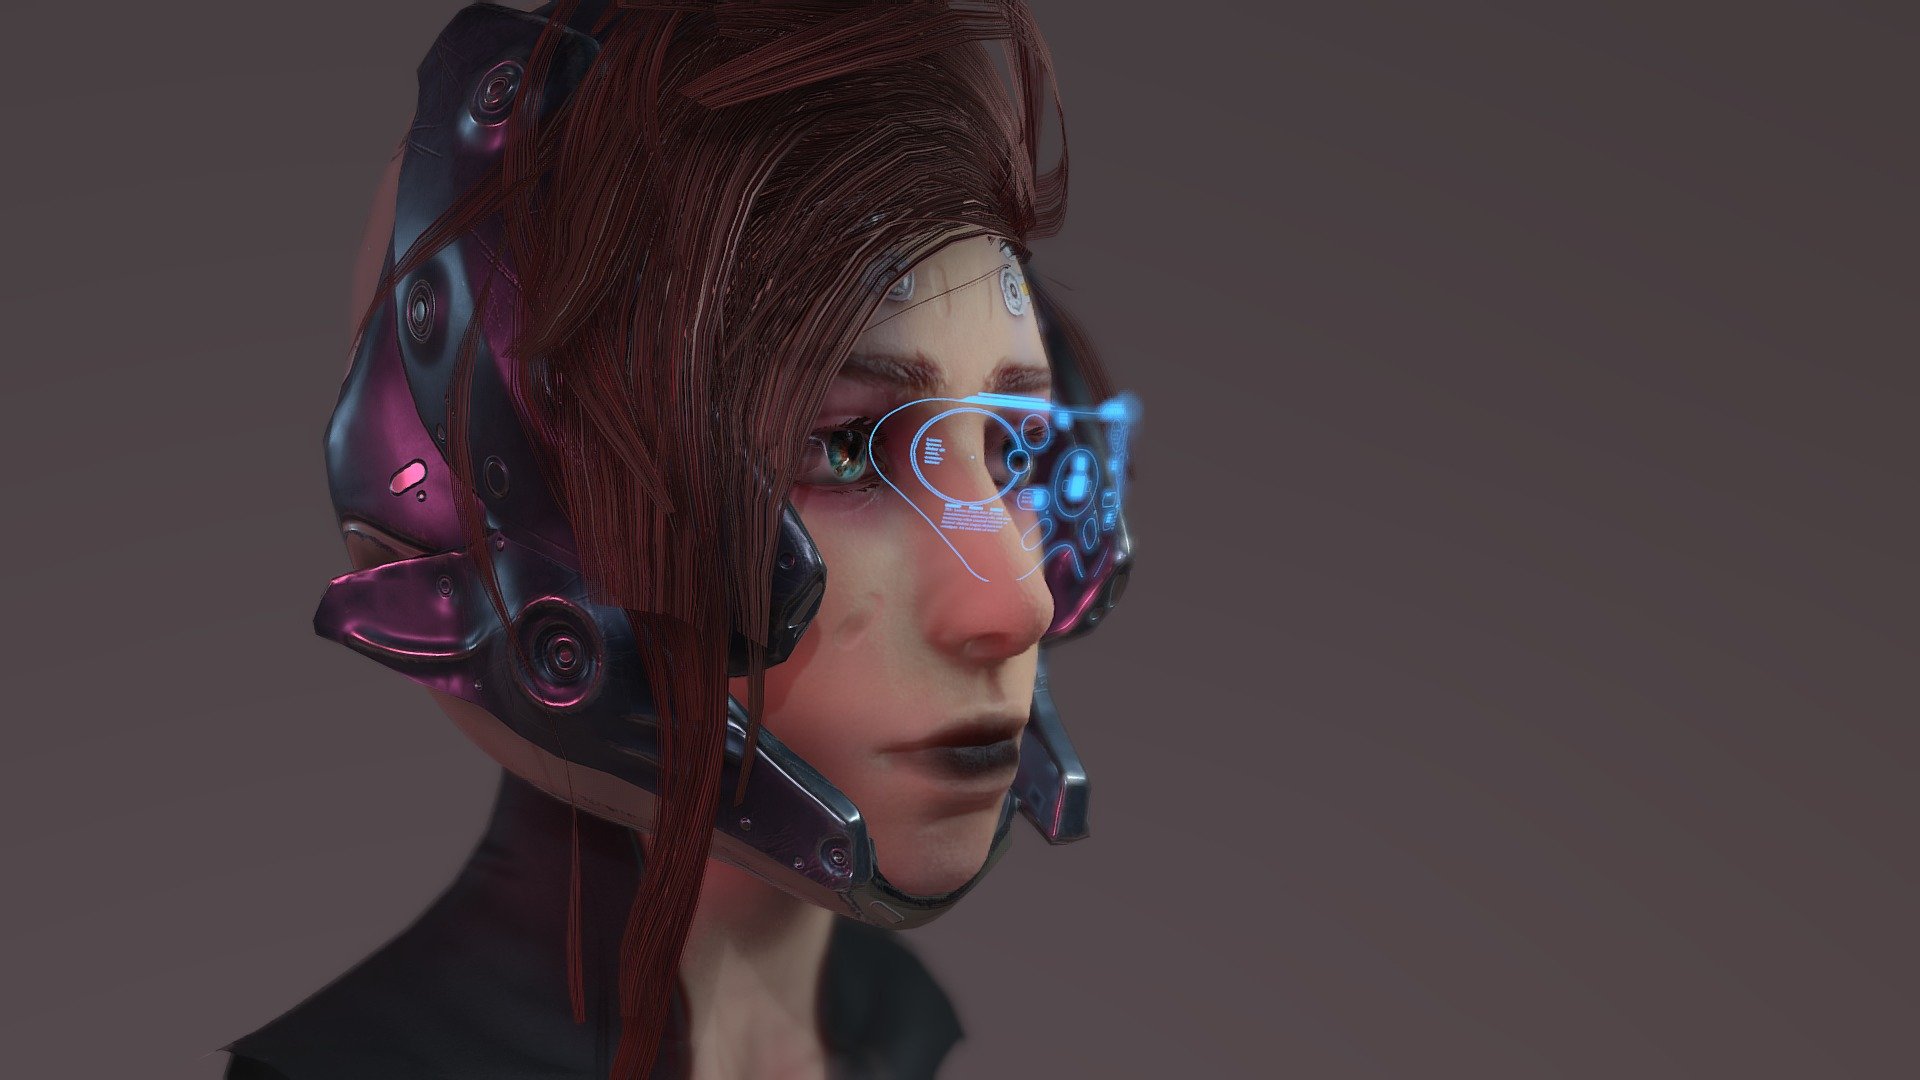 here's a stab at making a cyberpunk hacker character! 
really looking forward to CDProjekt Red's Cyberpunk 2077 announcement! - neural interface - 3D model by awinkler 3d model